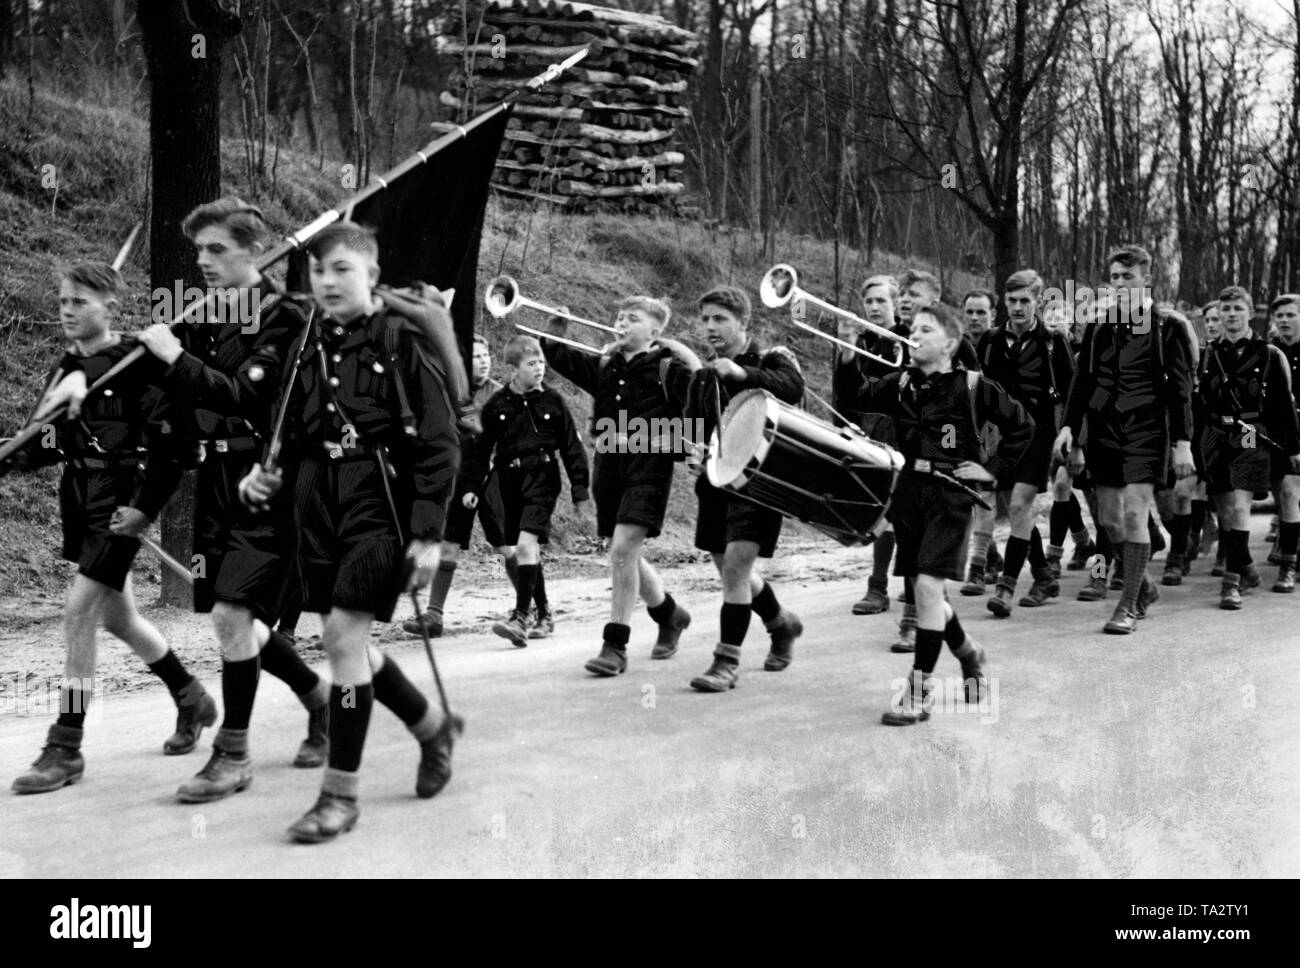 Pimpfs are marching in line with music along a forest path. In the background, a pile of stere wood. Stock Photo